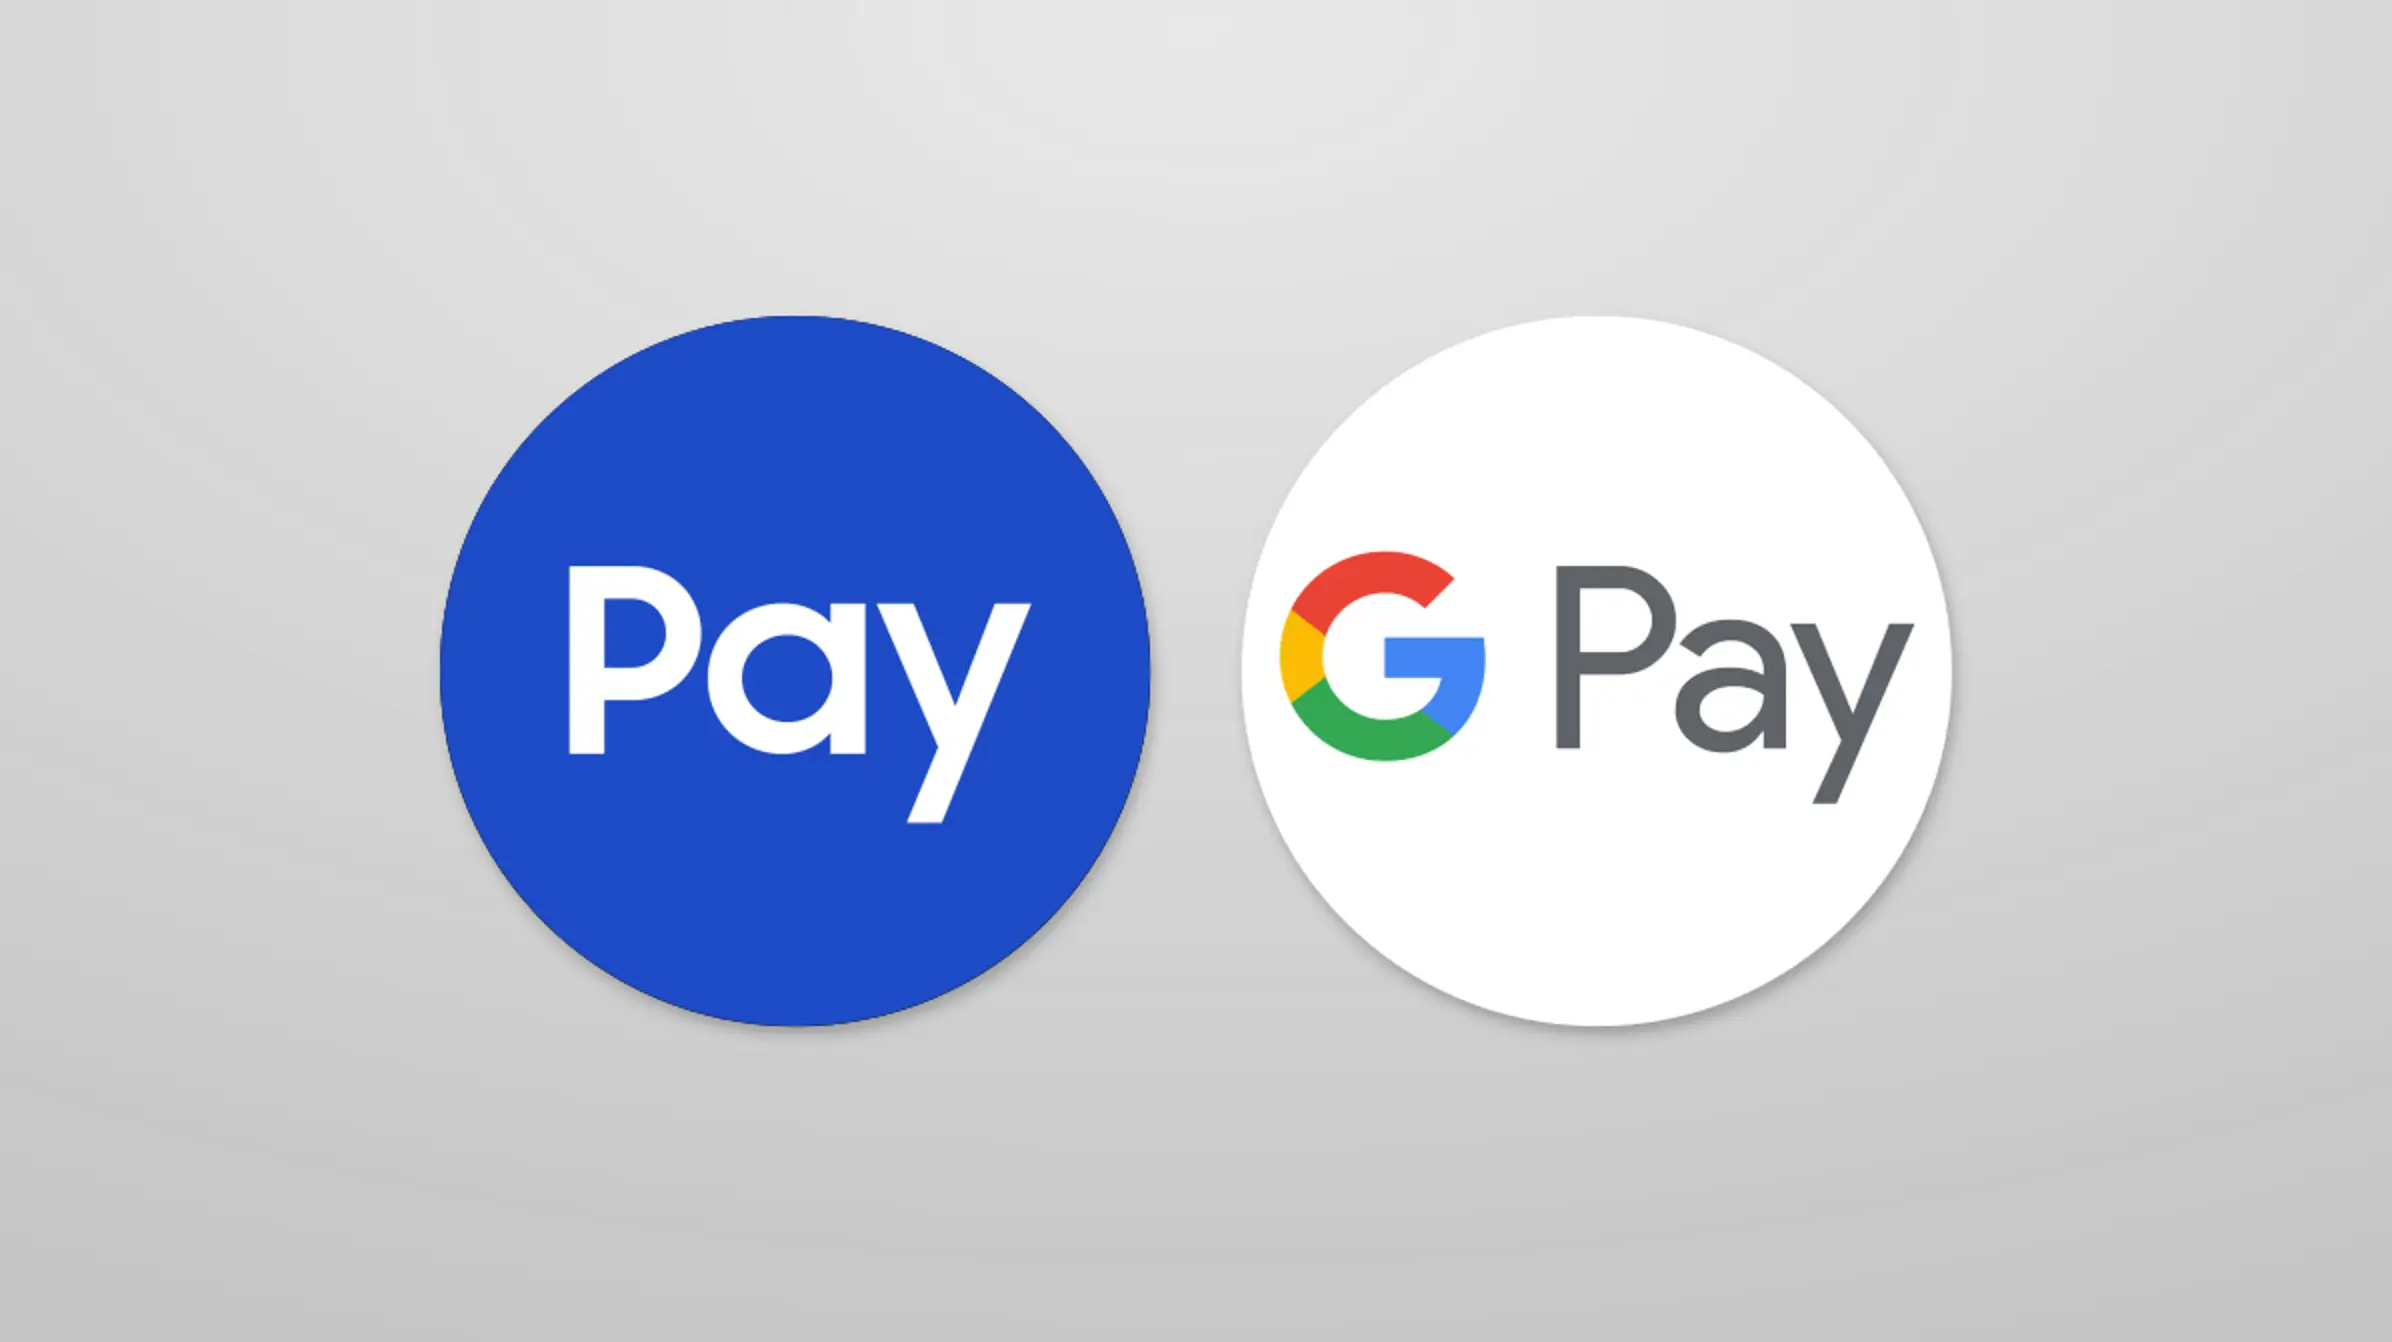 Google Pay V/s Samsung Pay: Which One to Choose?